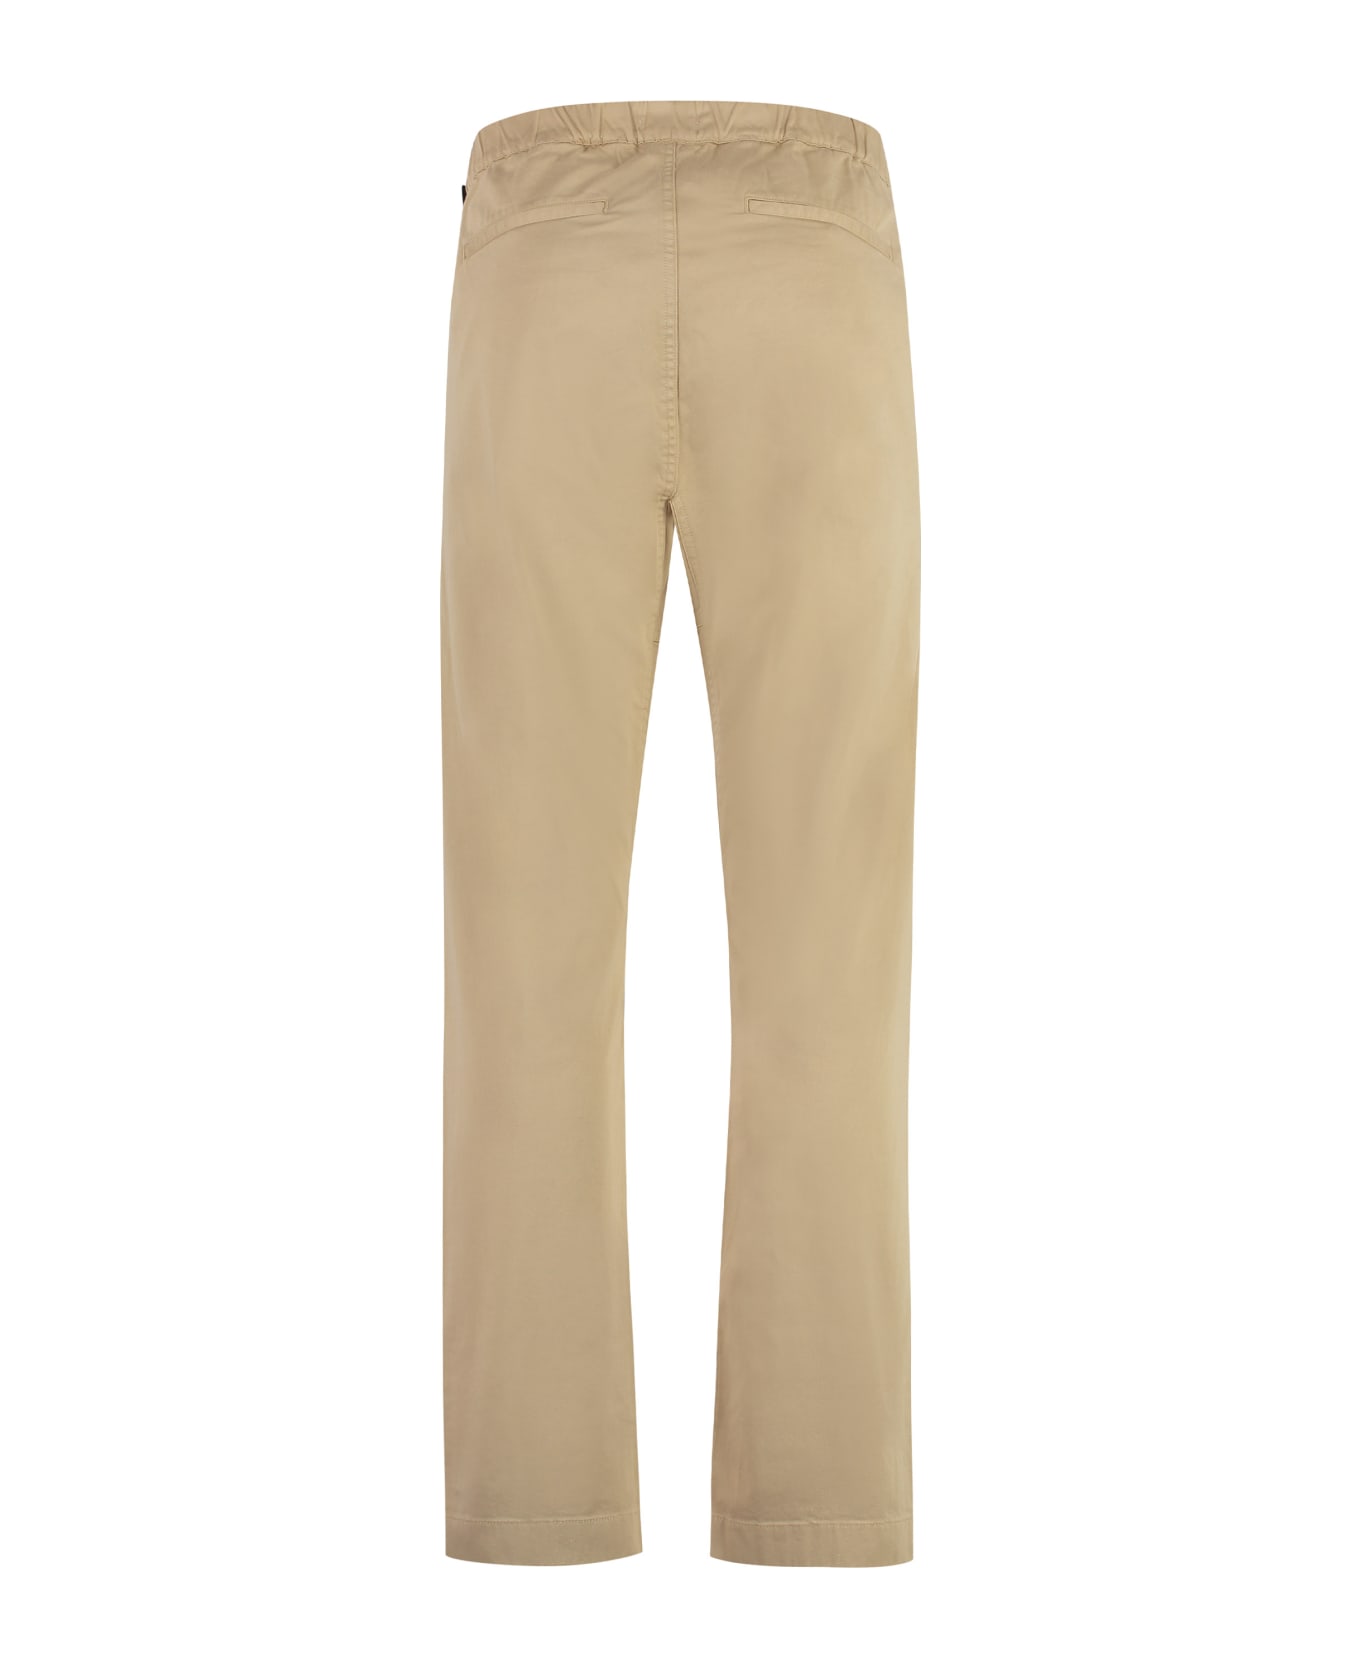 Woolrich Easy Cotton Trousers - Sand ボトムス